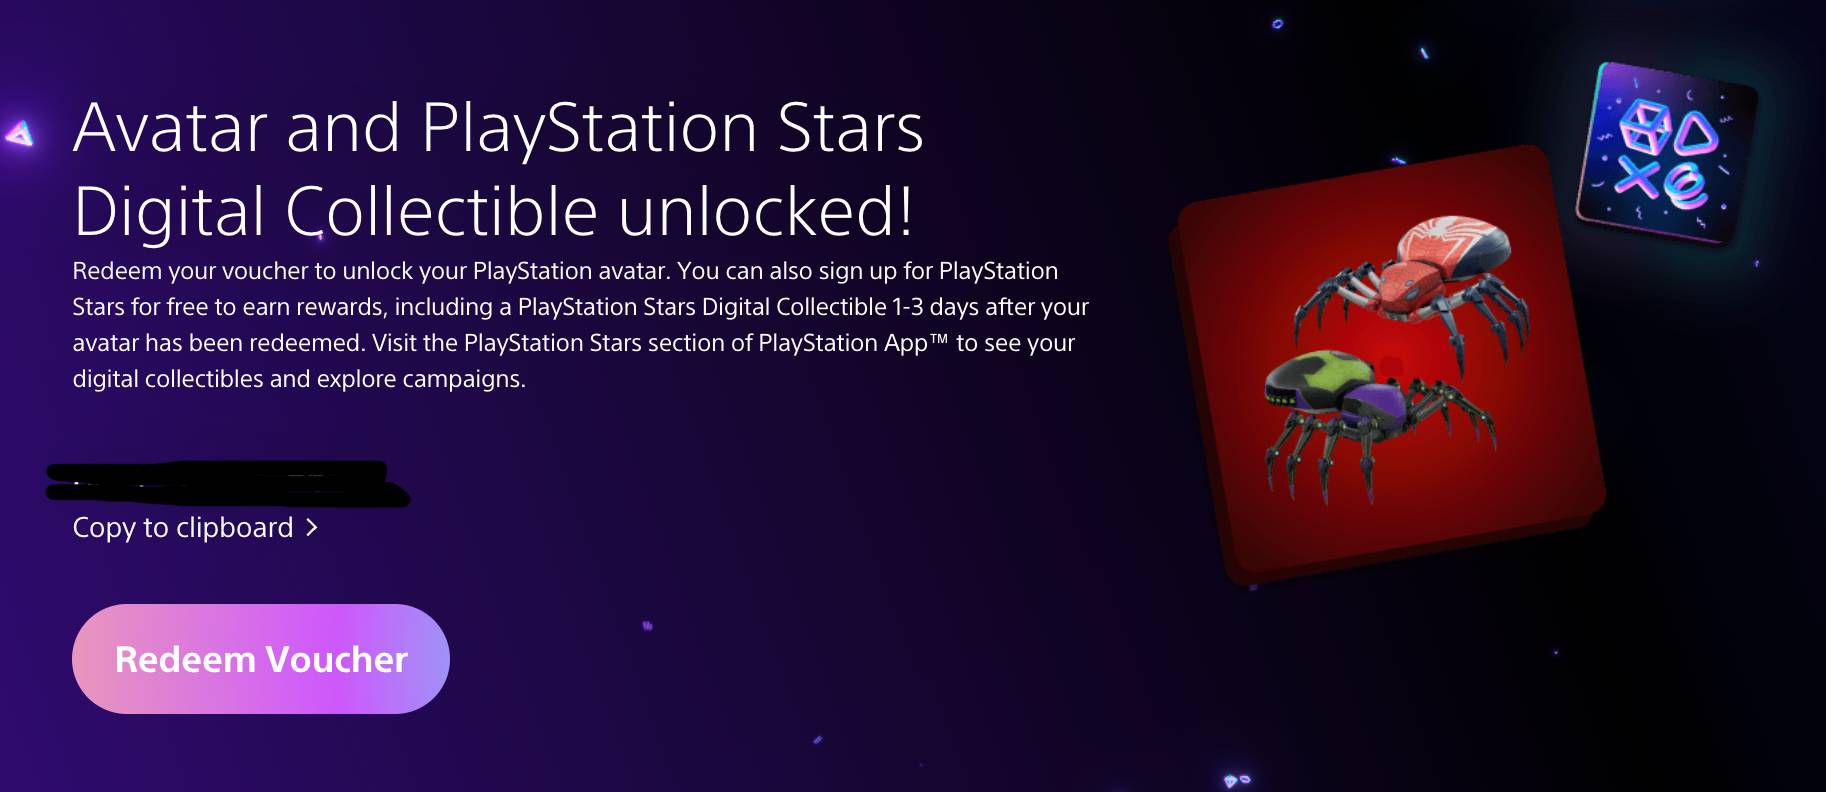 Free Avatars, PS Stars Points, PS5 to Win in PS Plus Season of Play